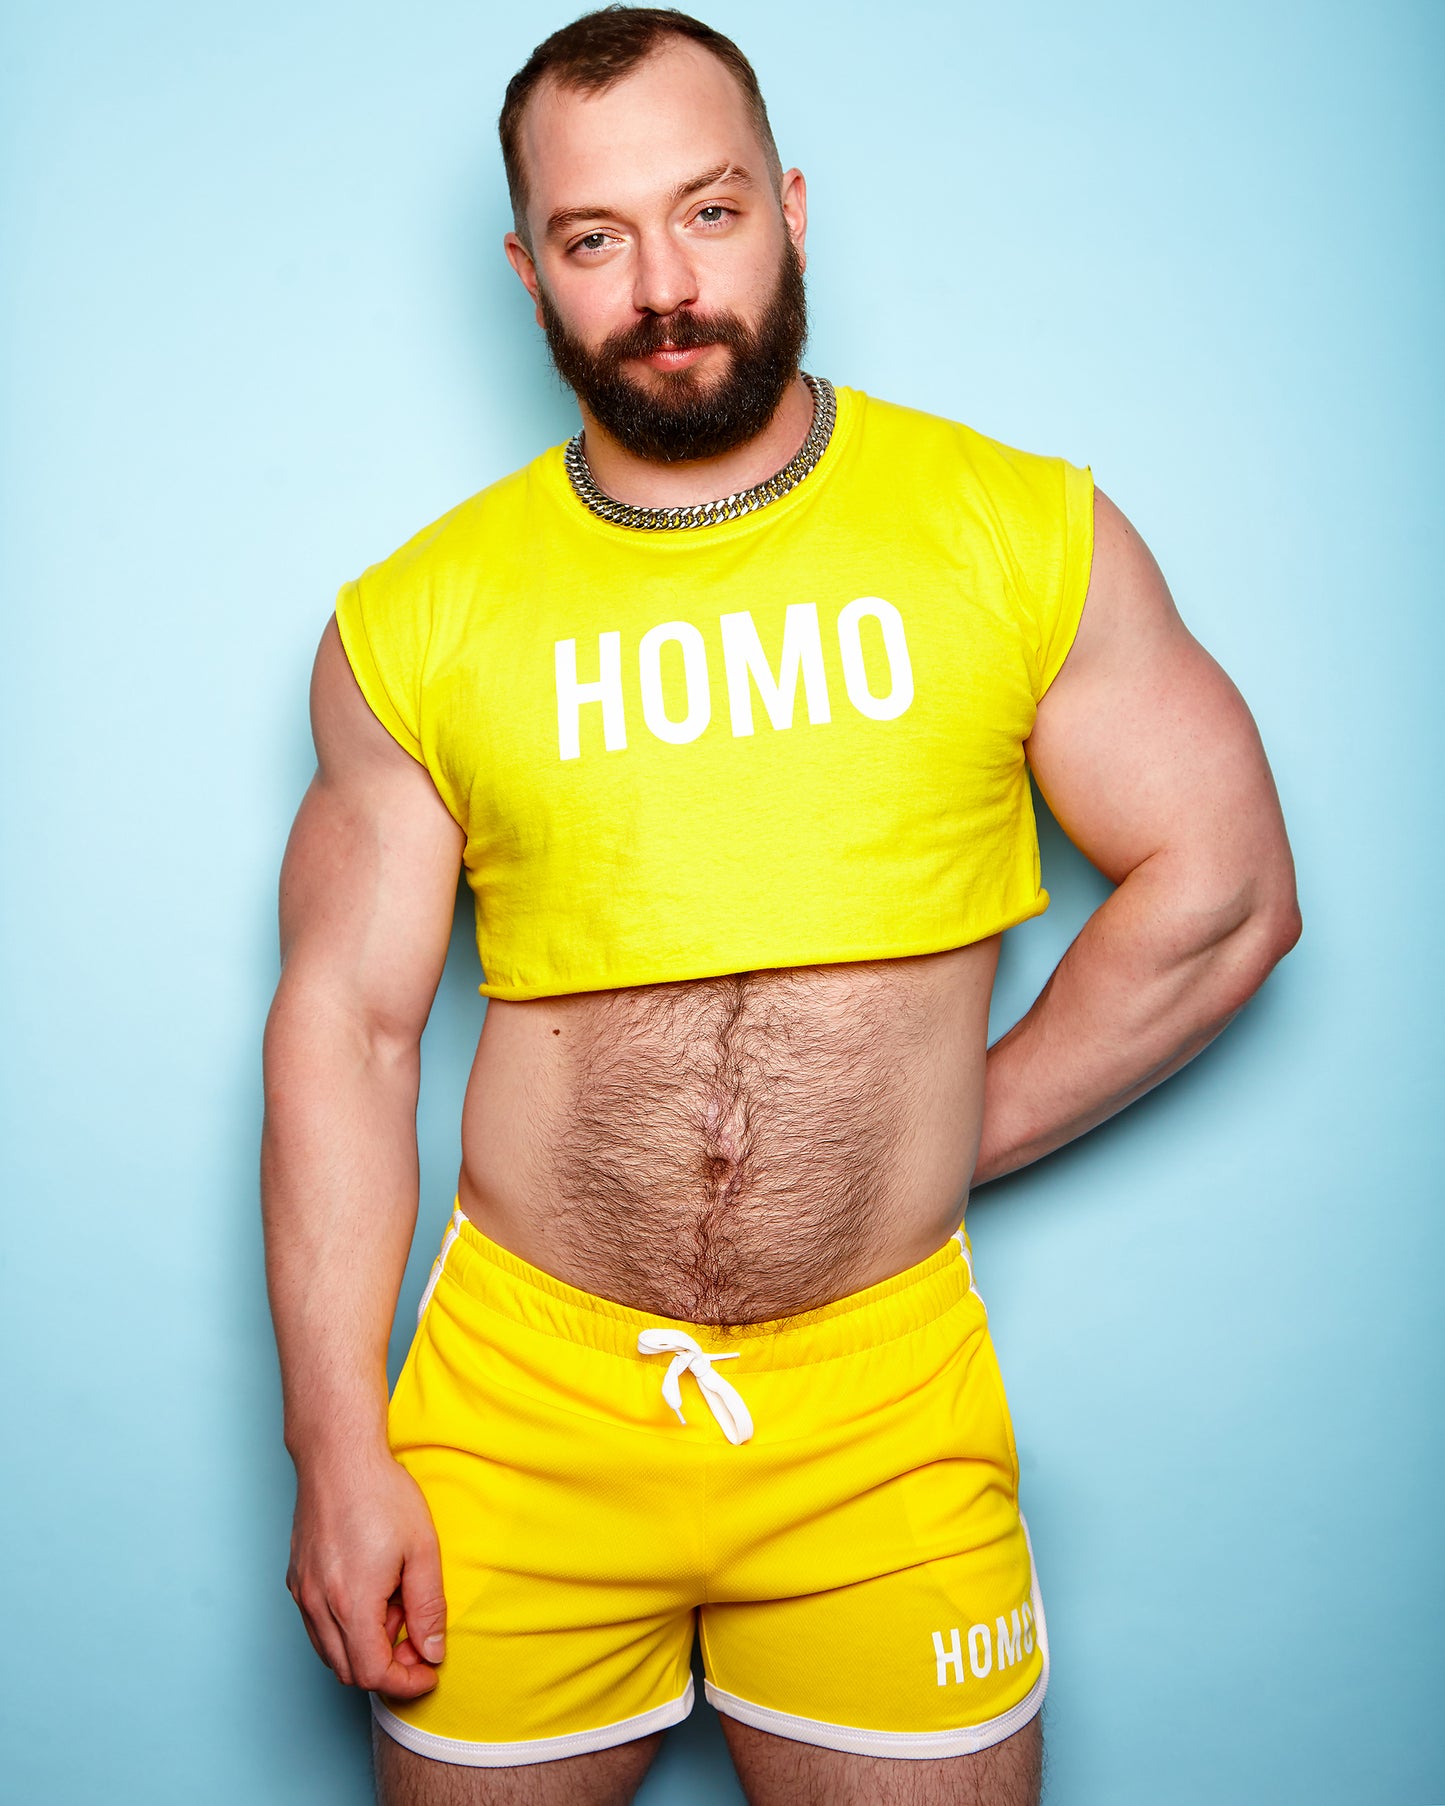 Double pack - HOMO white on yellow - crop top and short shorts - Full outfit.